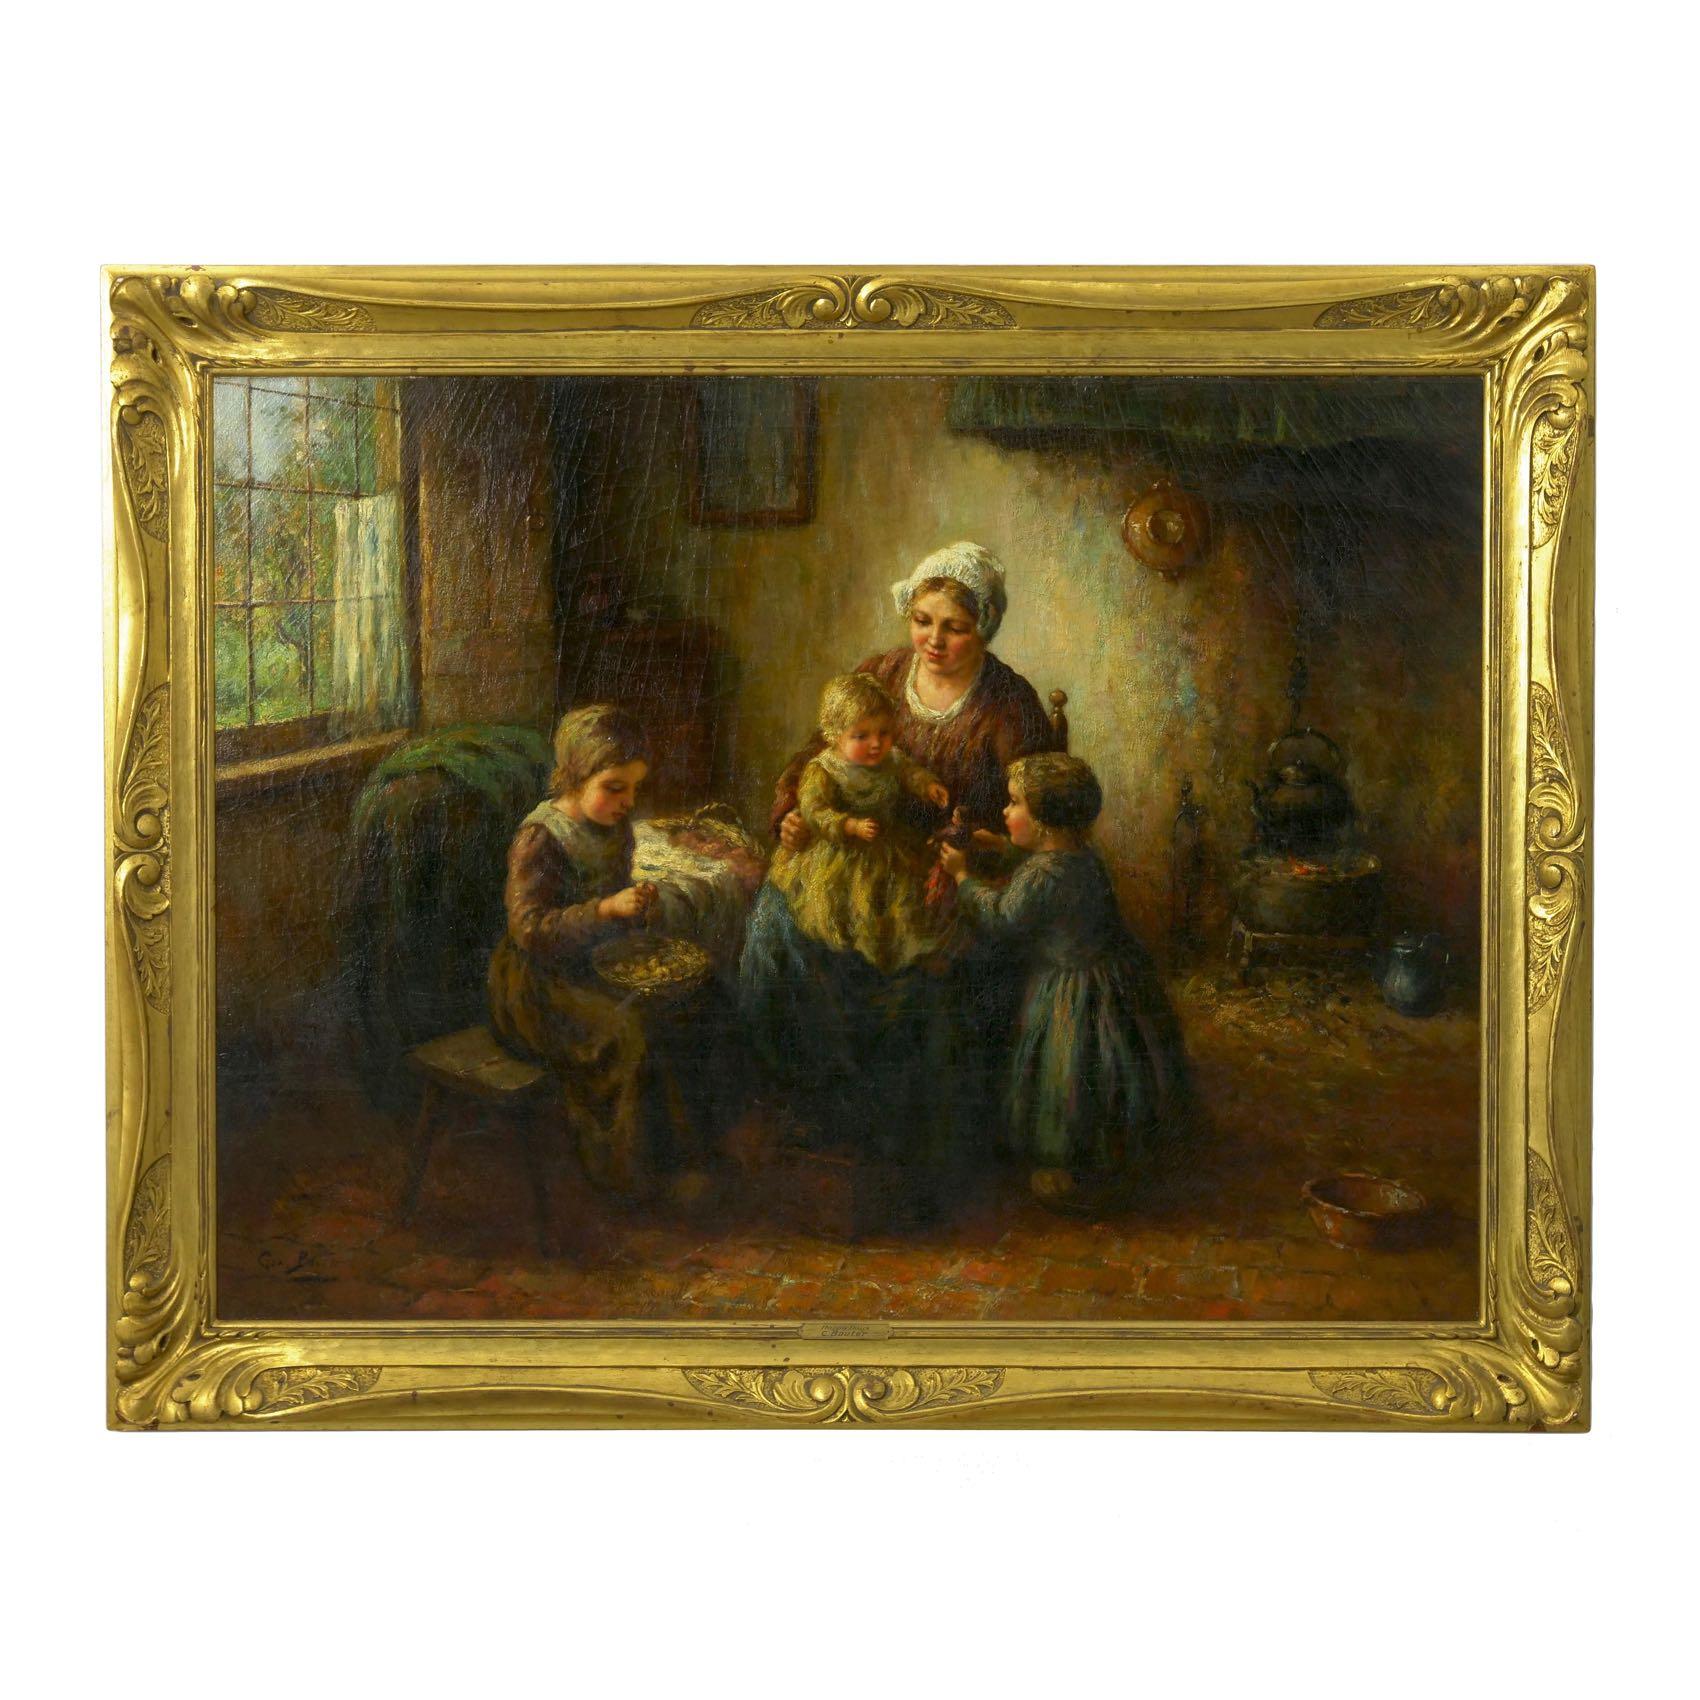 An exquisite work of art executed in oil on canvas by Cornelis Wouter Bouter, it is a quintessential representation of his oeuvre, which focused almost entirely on scenes of mothers with children and captured love and peace in the midst of poverty.